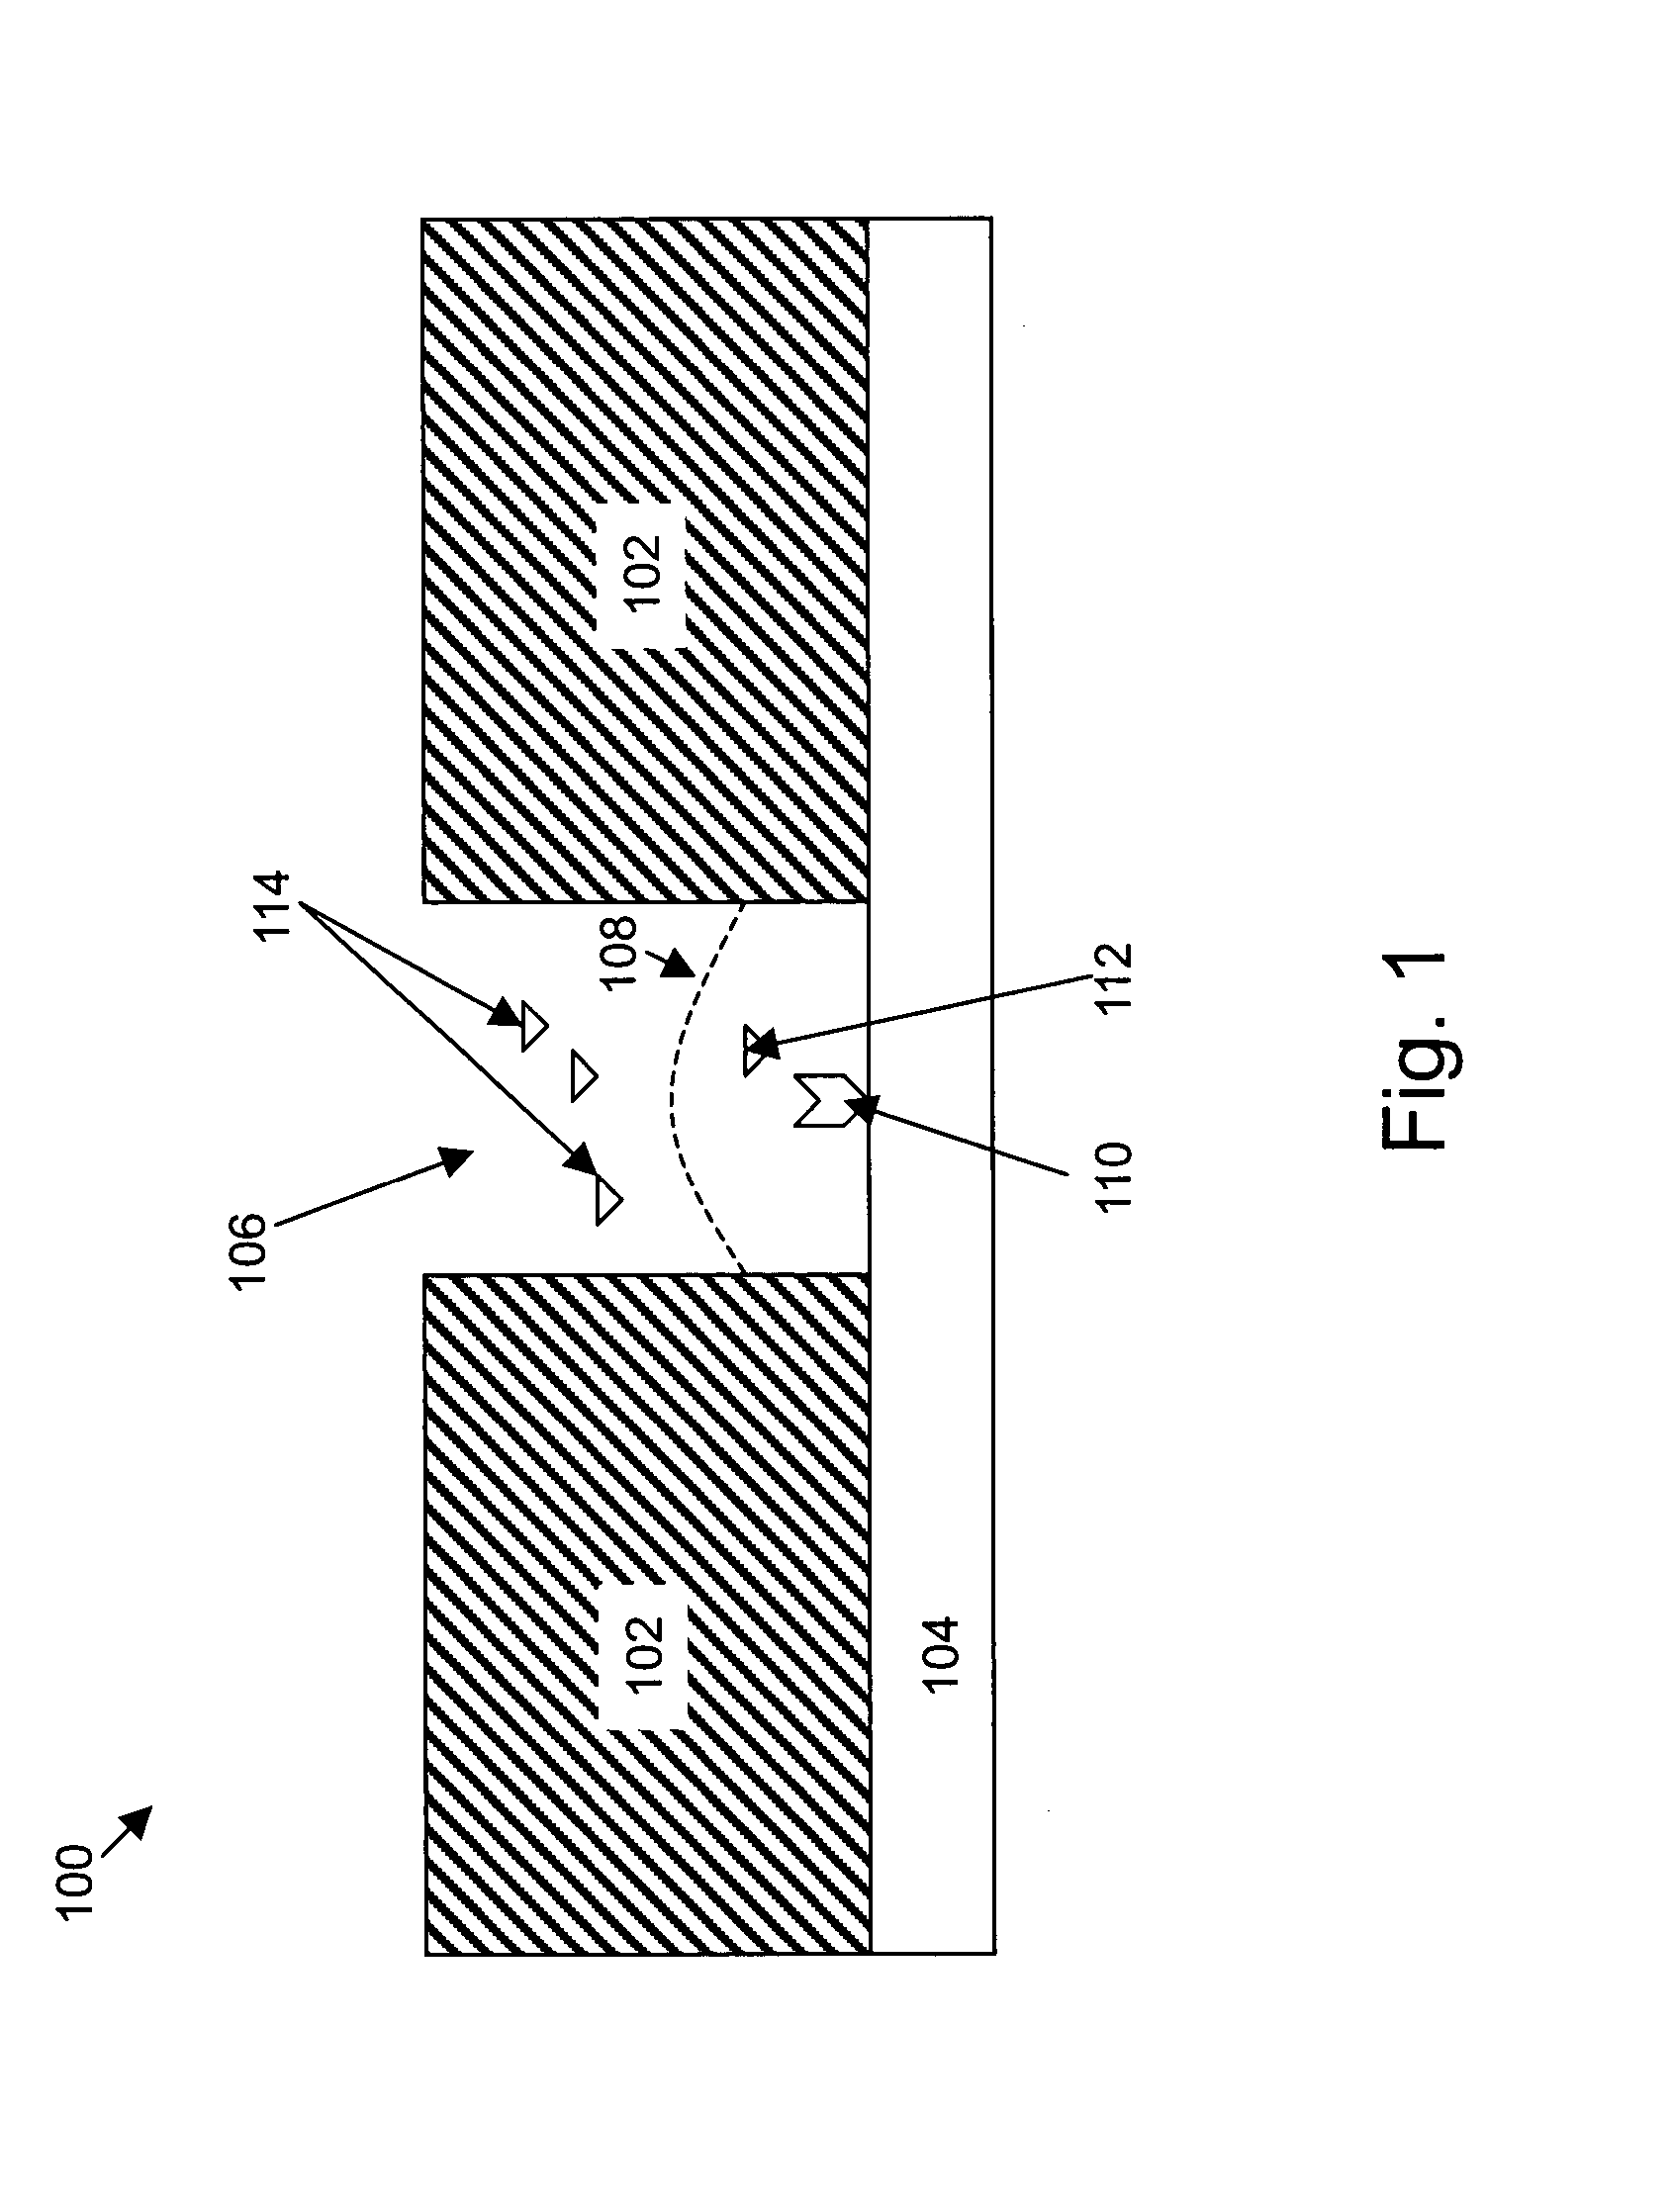 Articles having localized molecules disposed thereon and methods of producing same